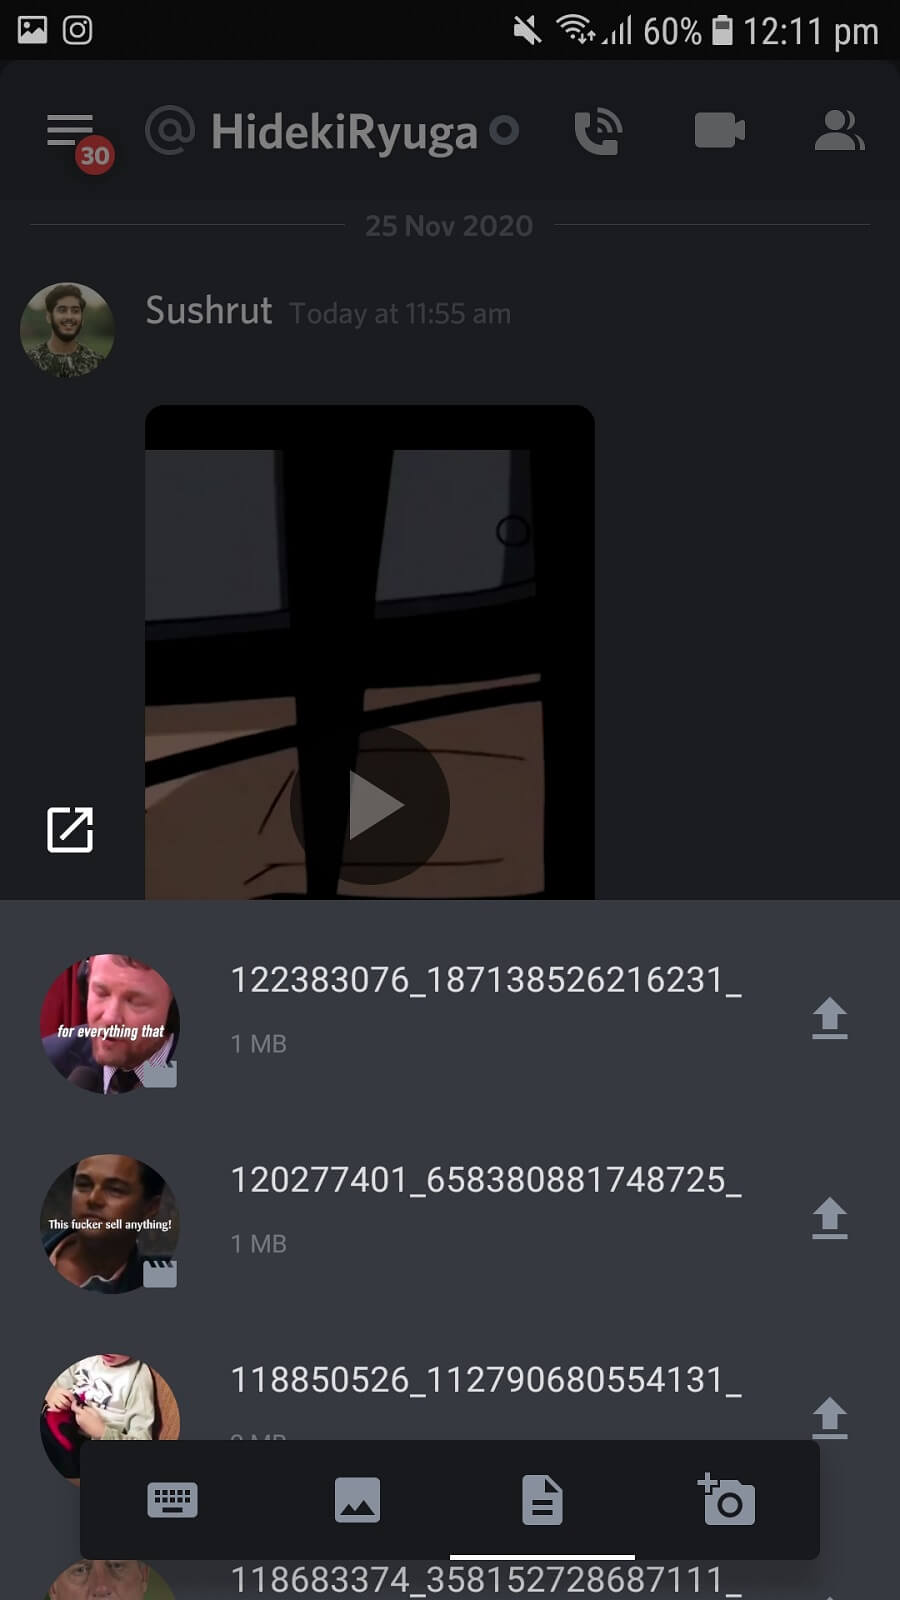 Click on the image icon to upload a pre-recorded video | Download Videos from Discord